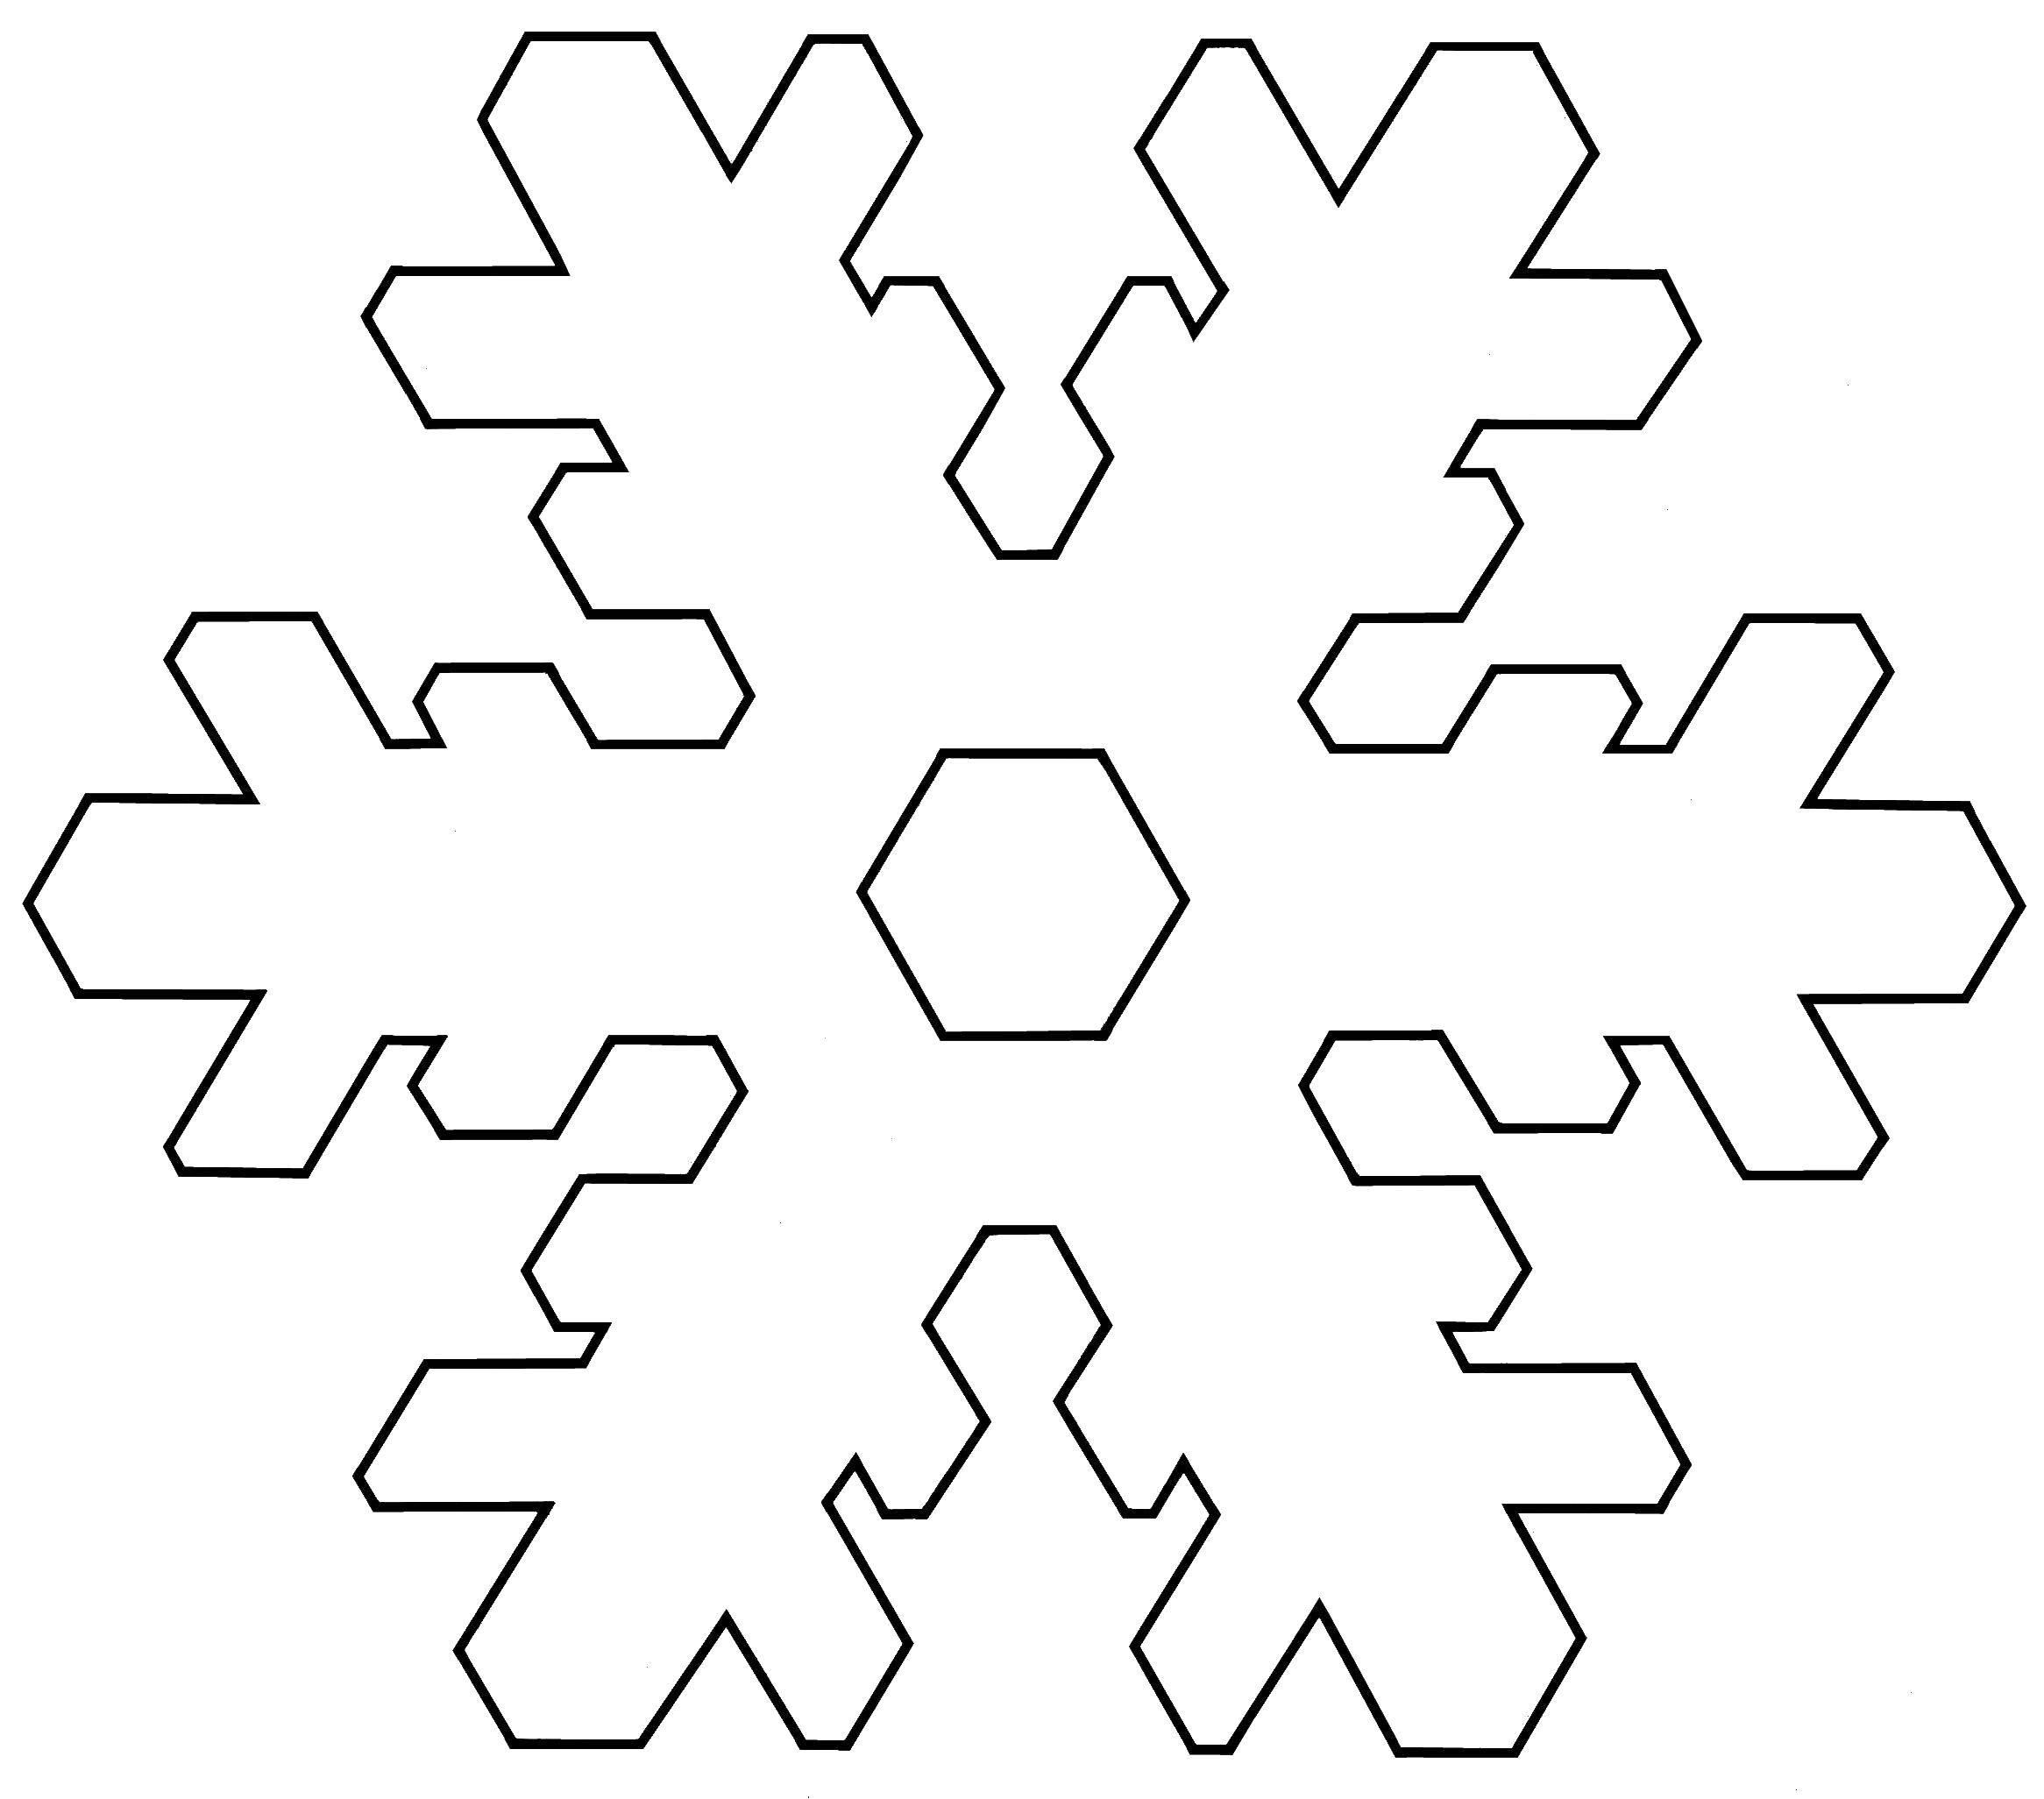 Coloring Symmetrical snowflake. Category The contour snowflakes. Tags:  Snowflakes, snow, winter.